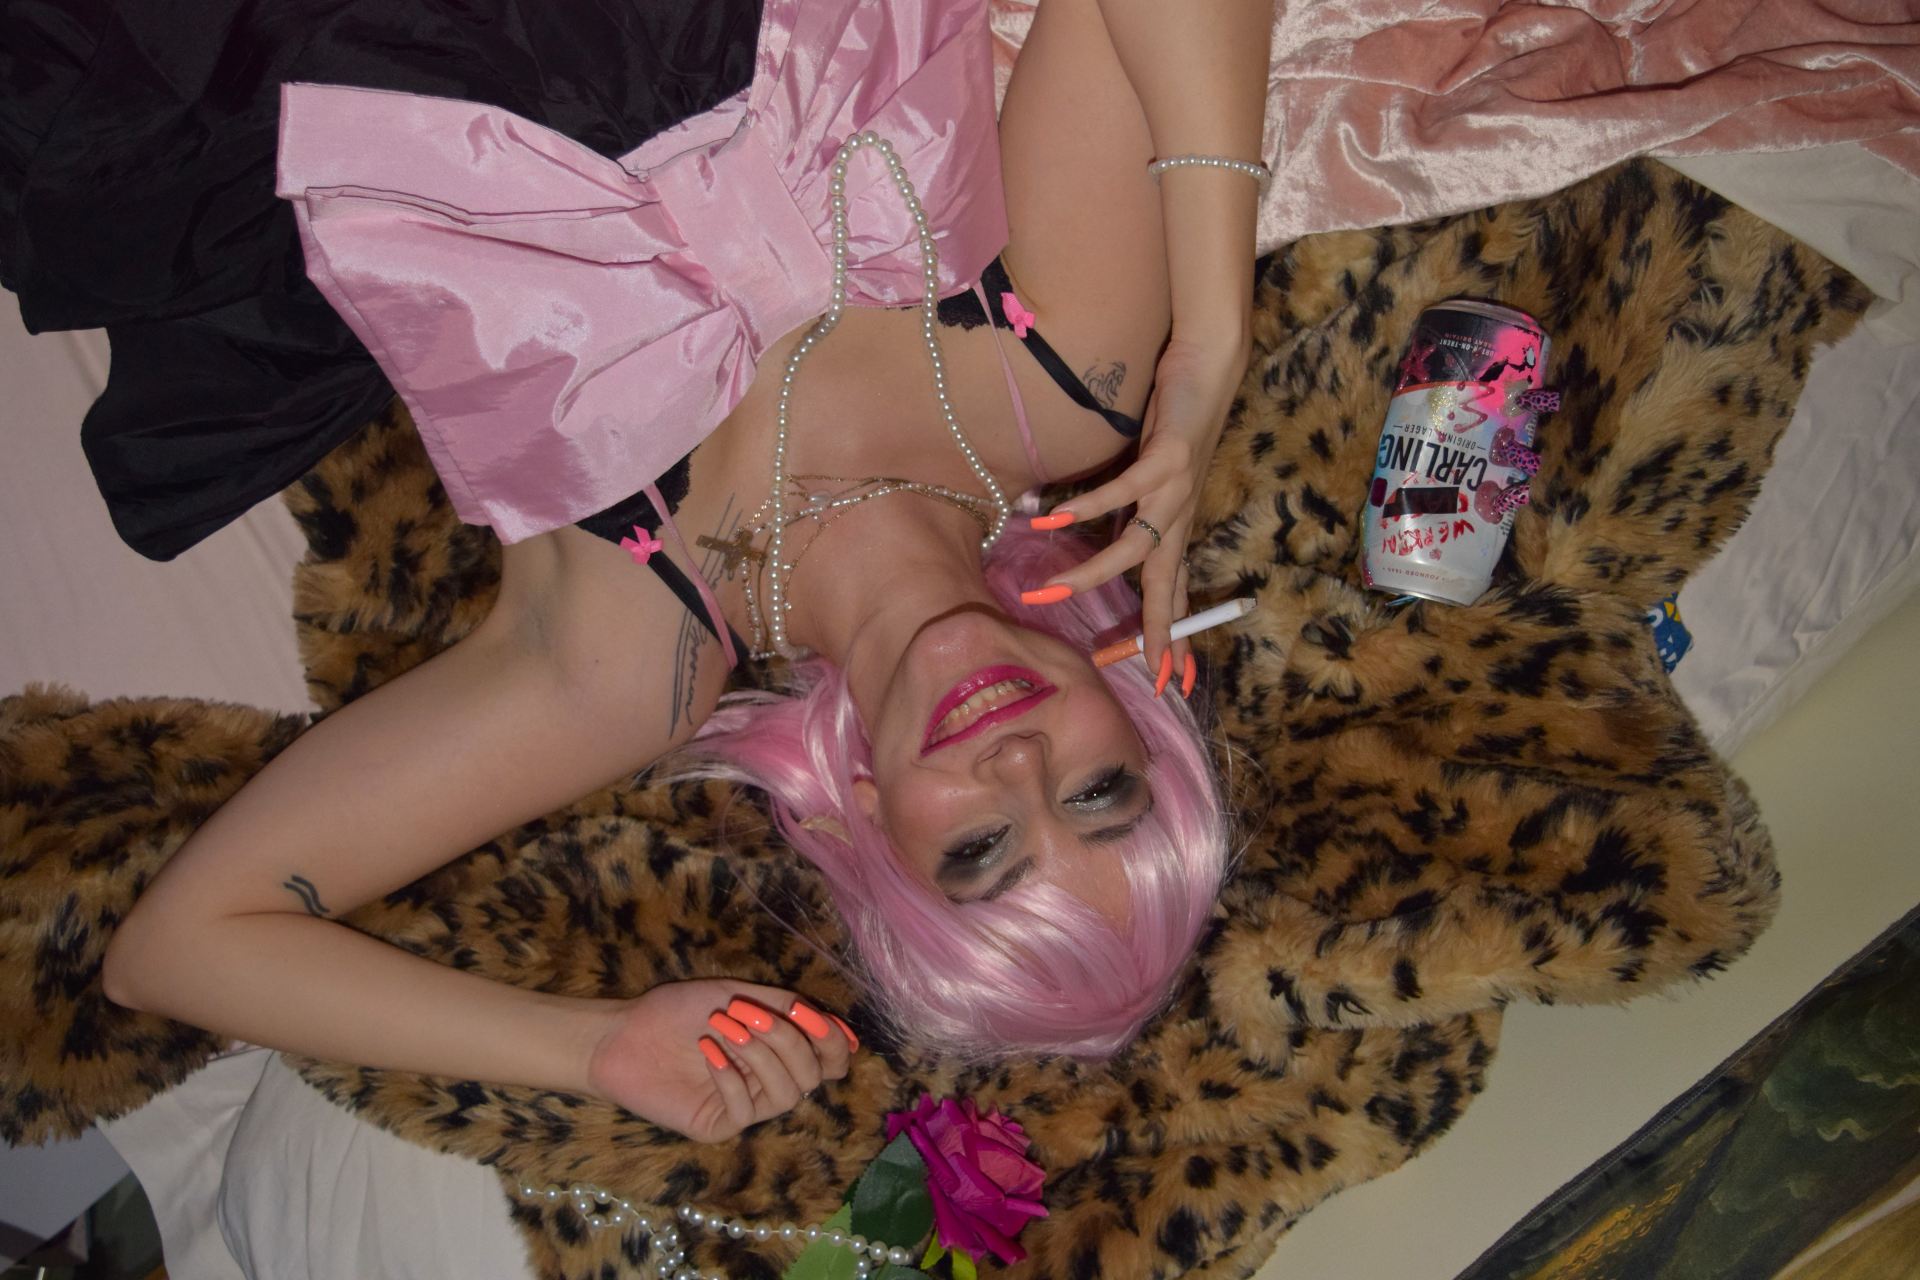 An image of a woman with pink hair, nails and dress laying on a leopard skin rug, smoking.